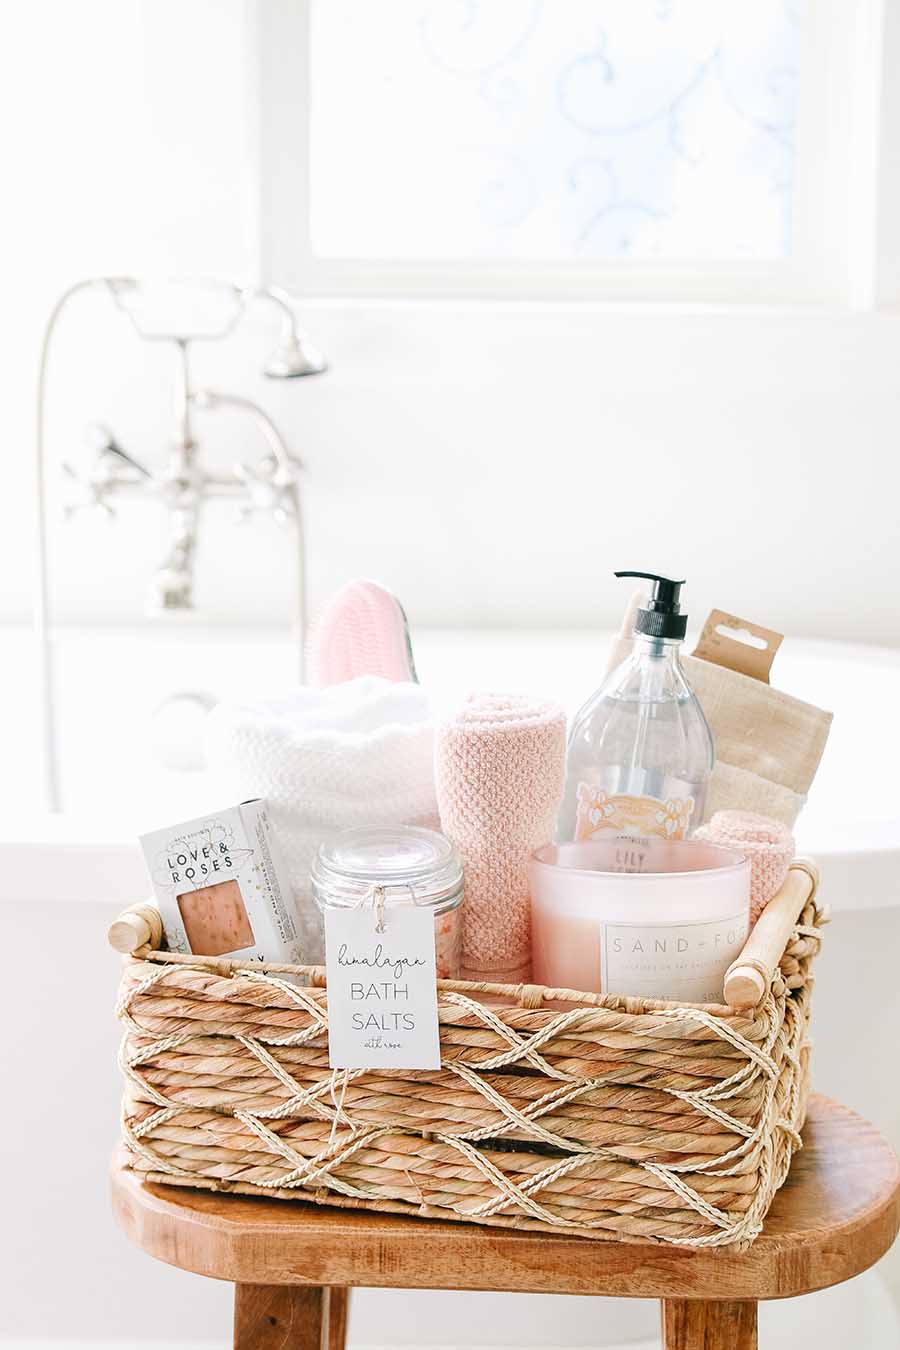 Spa Gift Basket Ideas. Need some Gift Basket Ideas for Mother's Day? Or for that matter any friend who loves tea parties? Well, this post teaches all the things to consider when putting together a great gift basket from the container to the perfect items from HomeGoods! #giftbasketideas #giftbaskets #gifts #HomeGoods #shopbaskets #teabasket